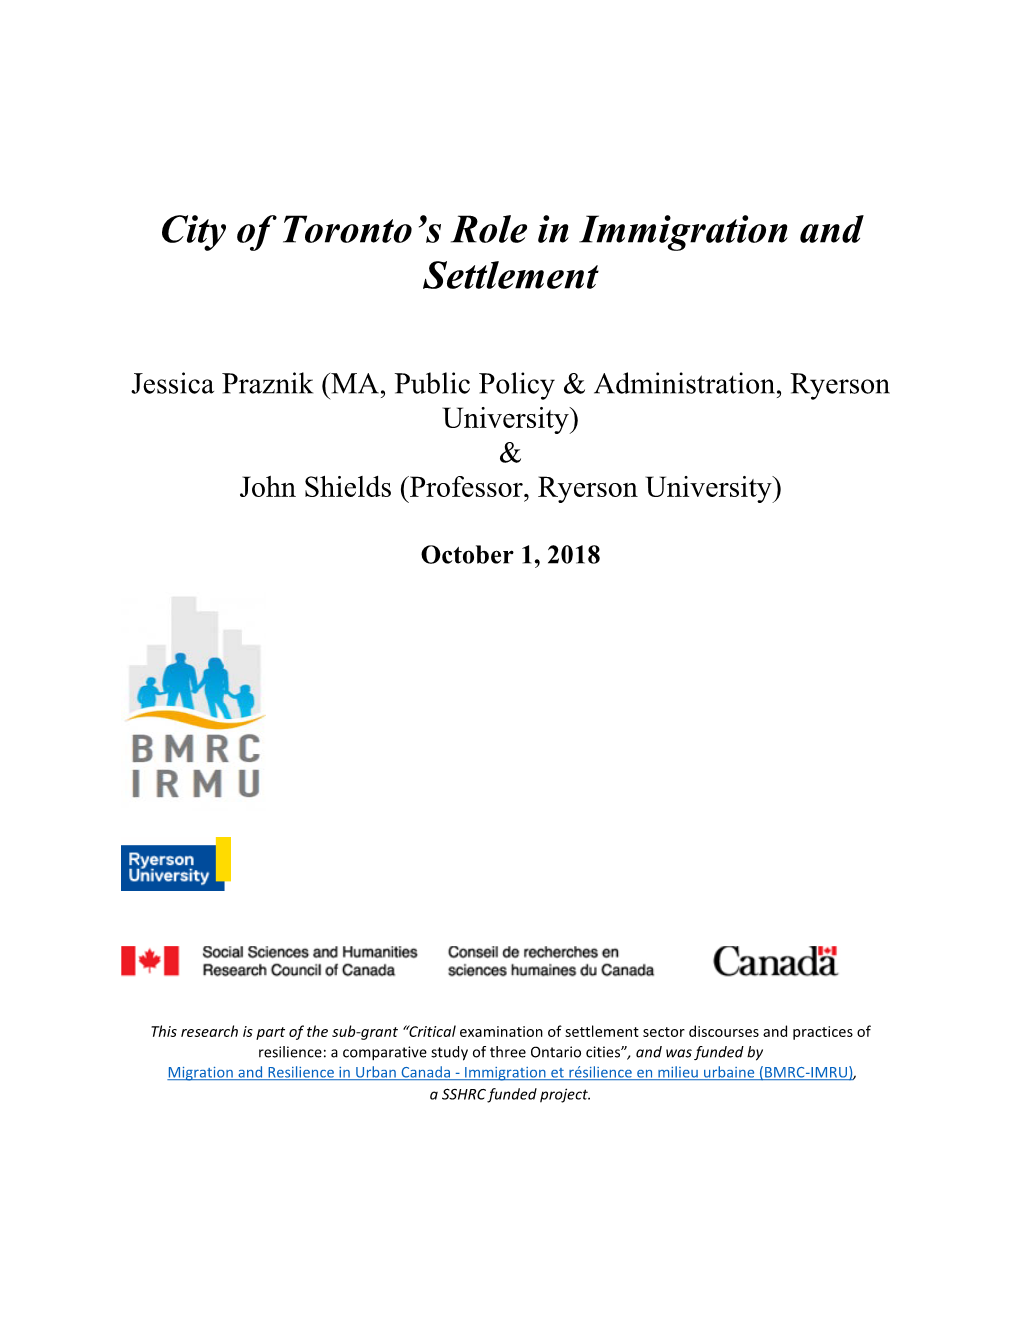 City of Toronto's Role in Immigration and Settlement